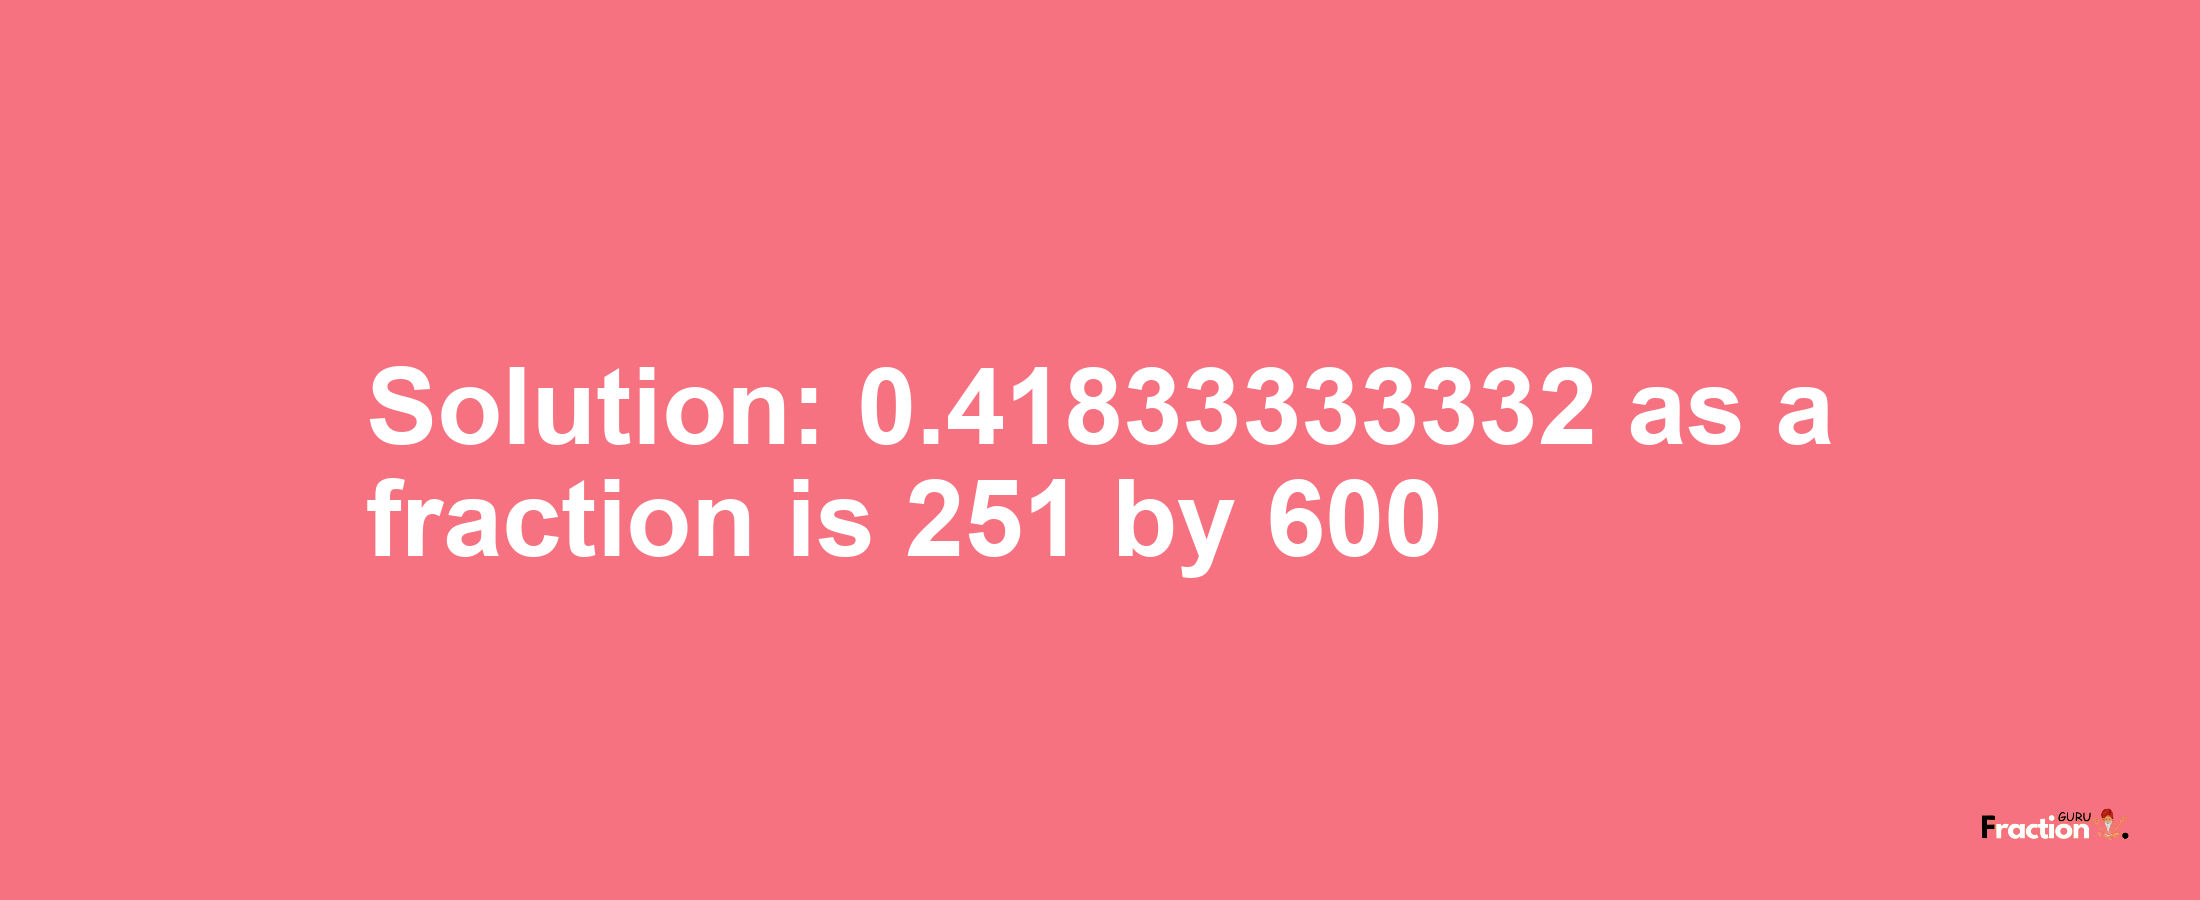 Solution:0.41833333332 as a fraction is 251/600